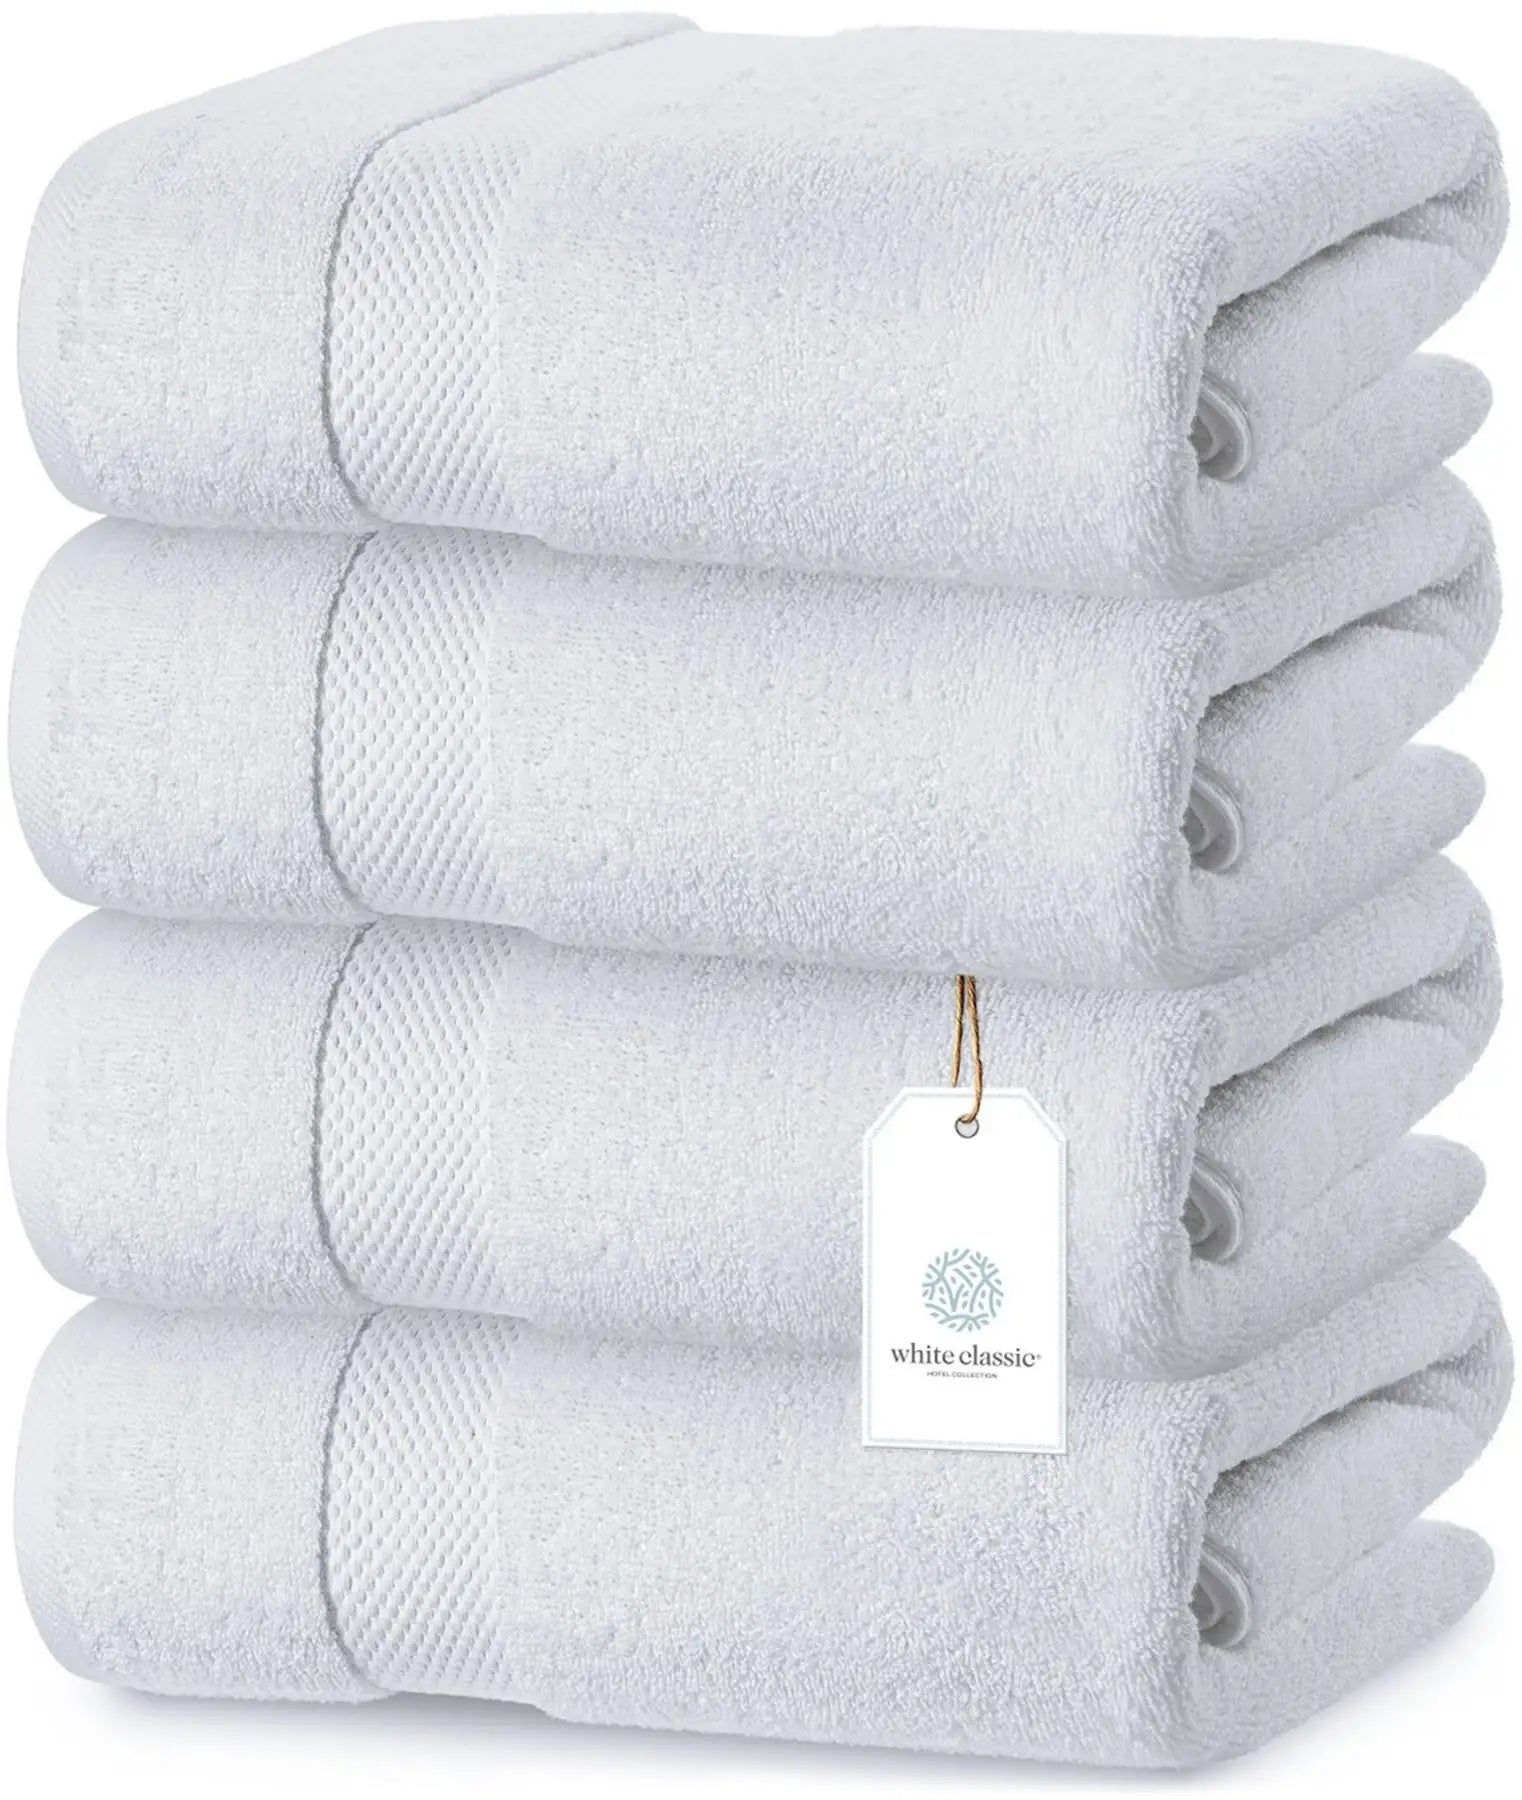 White Classic Resort Collection Soft Bath Towels | 28x55 Luxury Hotel Plush  & Absorbent Cotton Bath Towel Large [4 Pack, Smoke Grey]